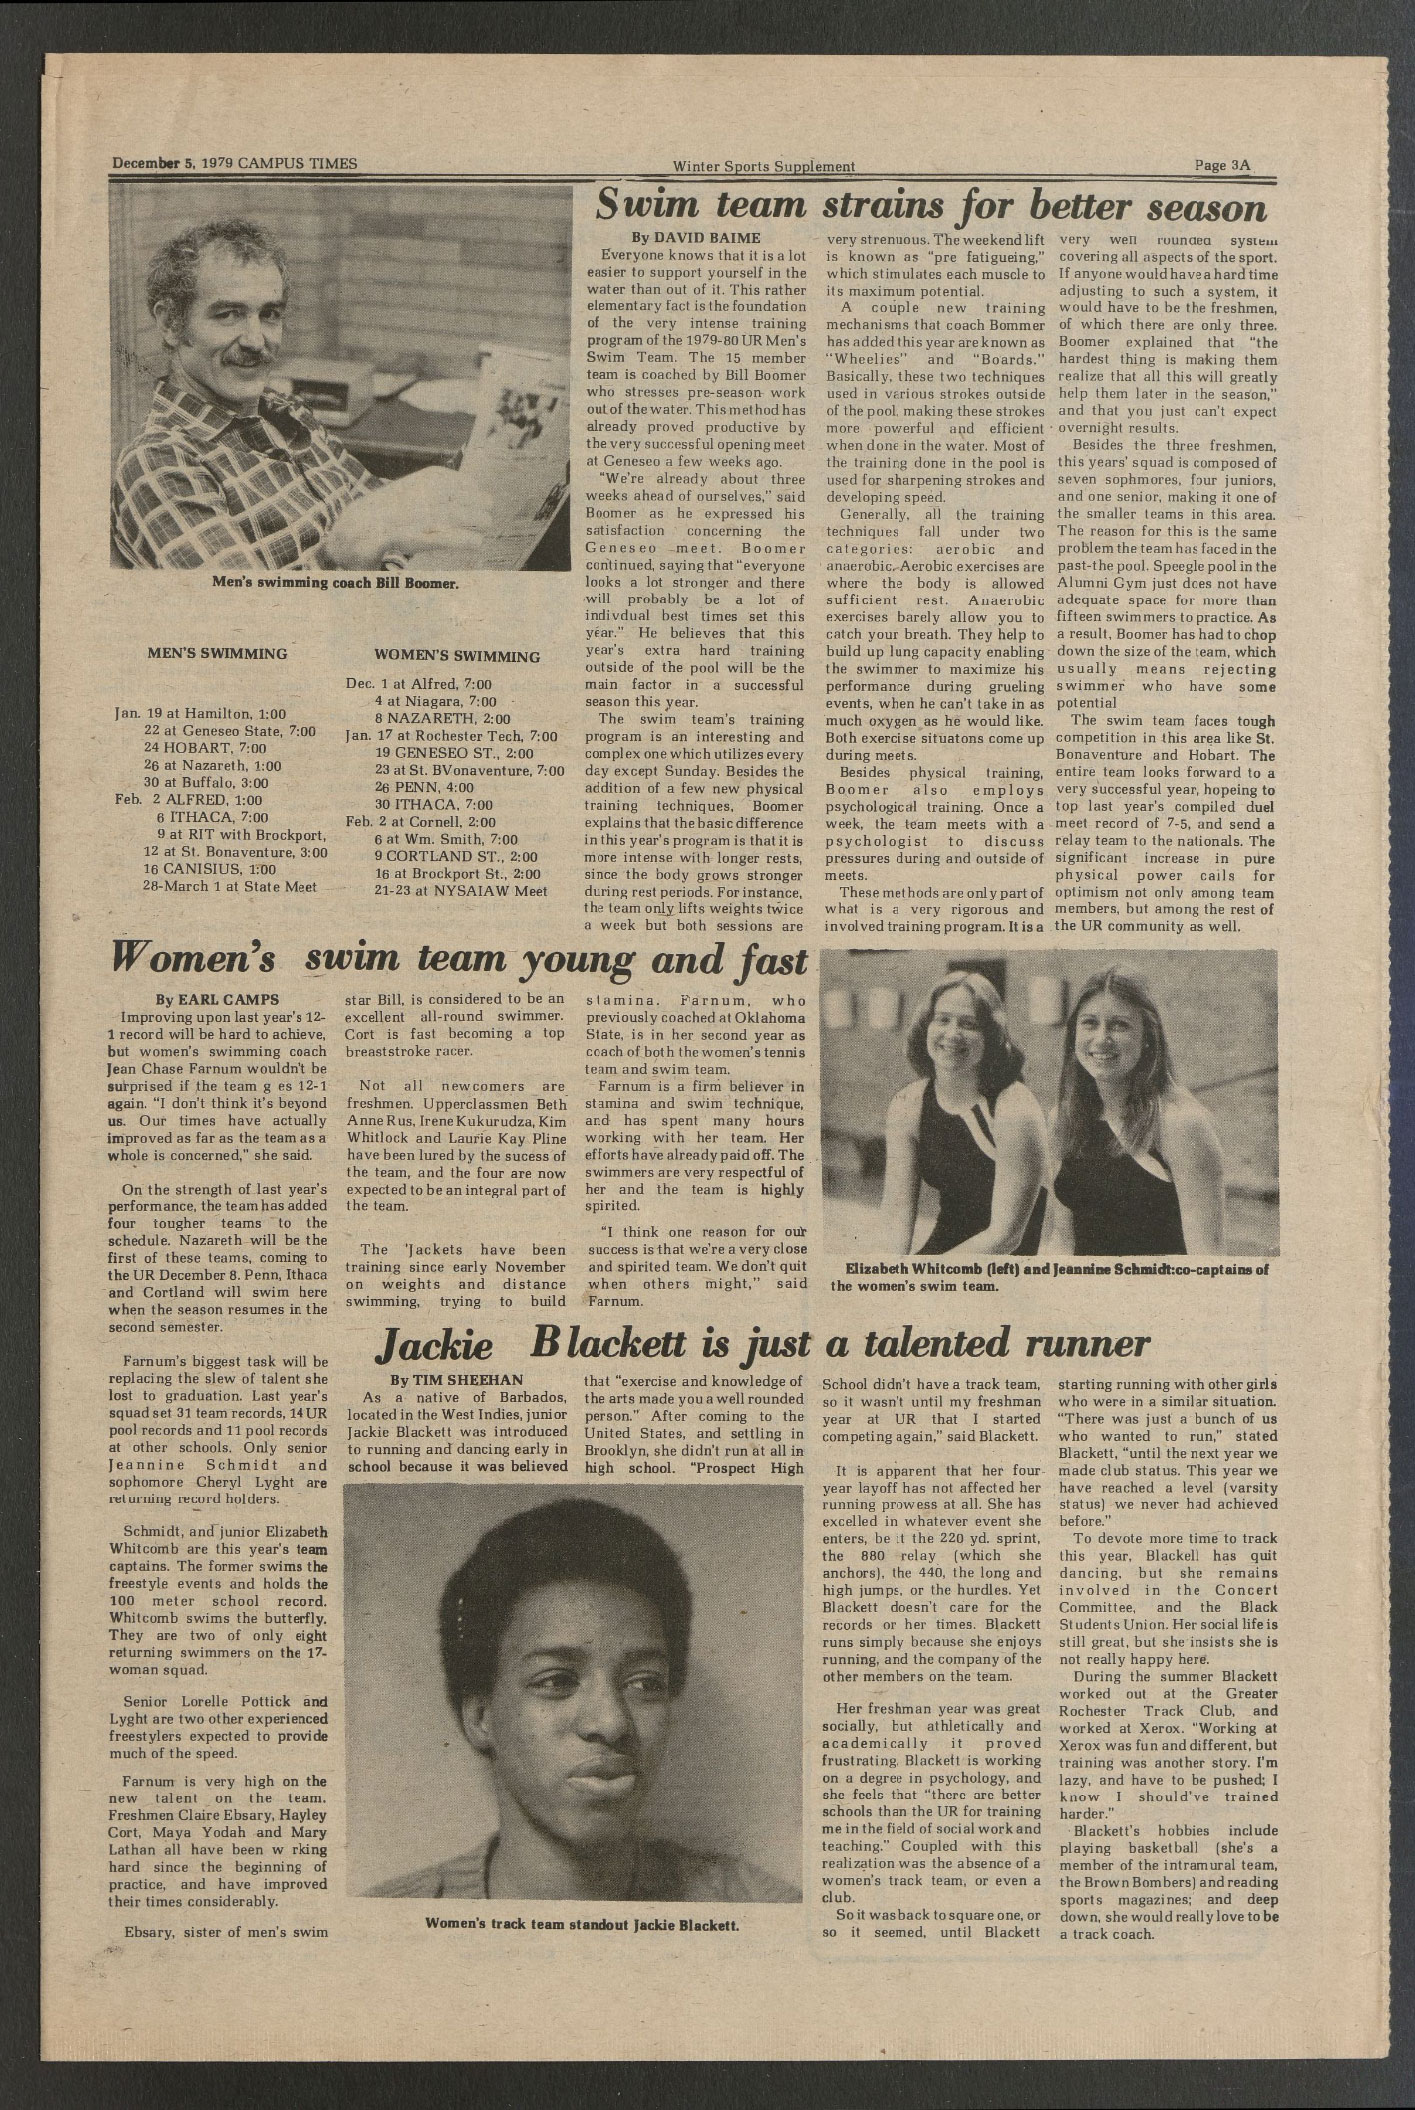 A scan of an article featuring Jackie Blackett ’81 from Campus Times on December 12, 1979.